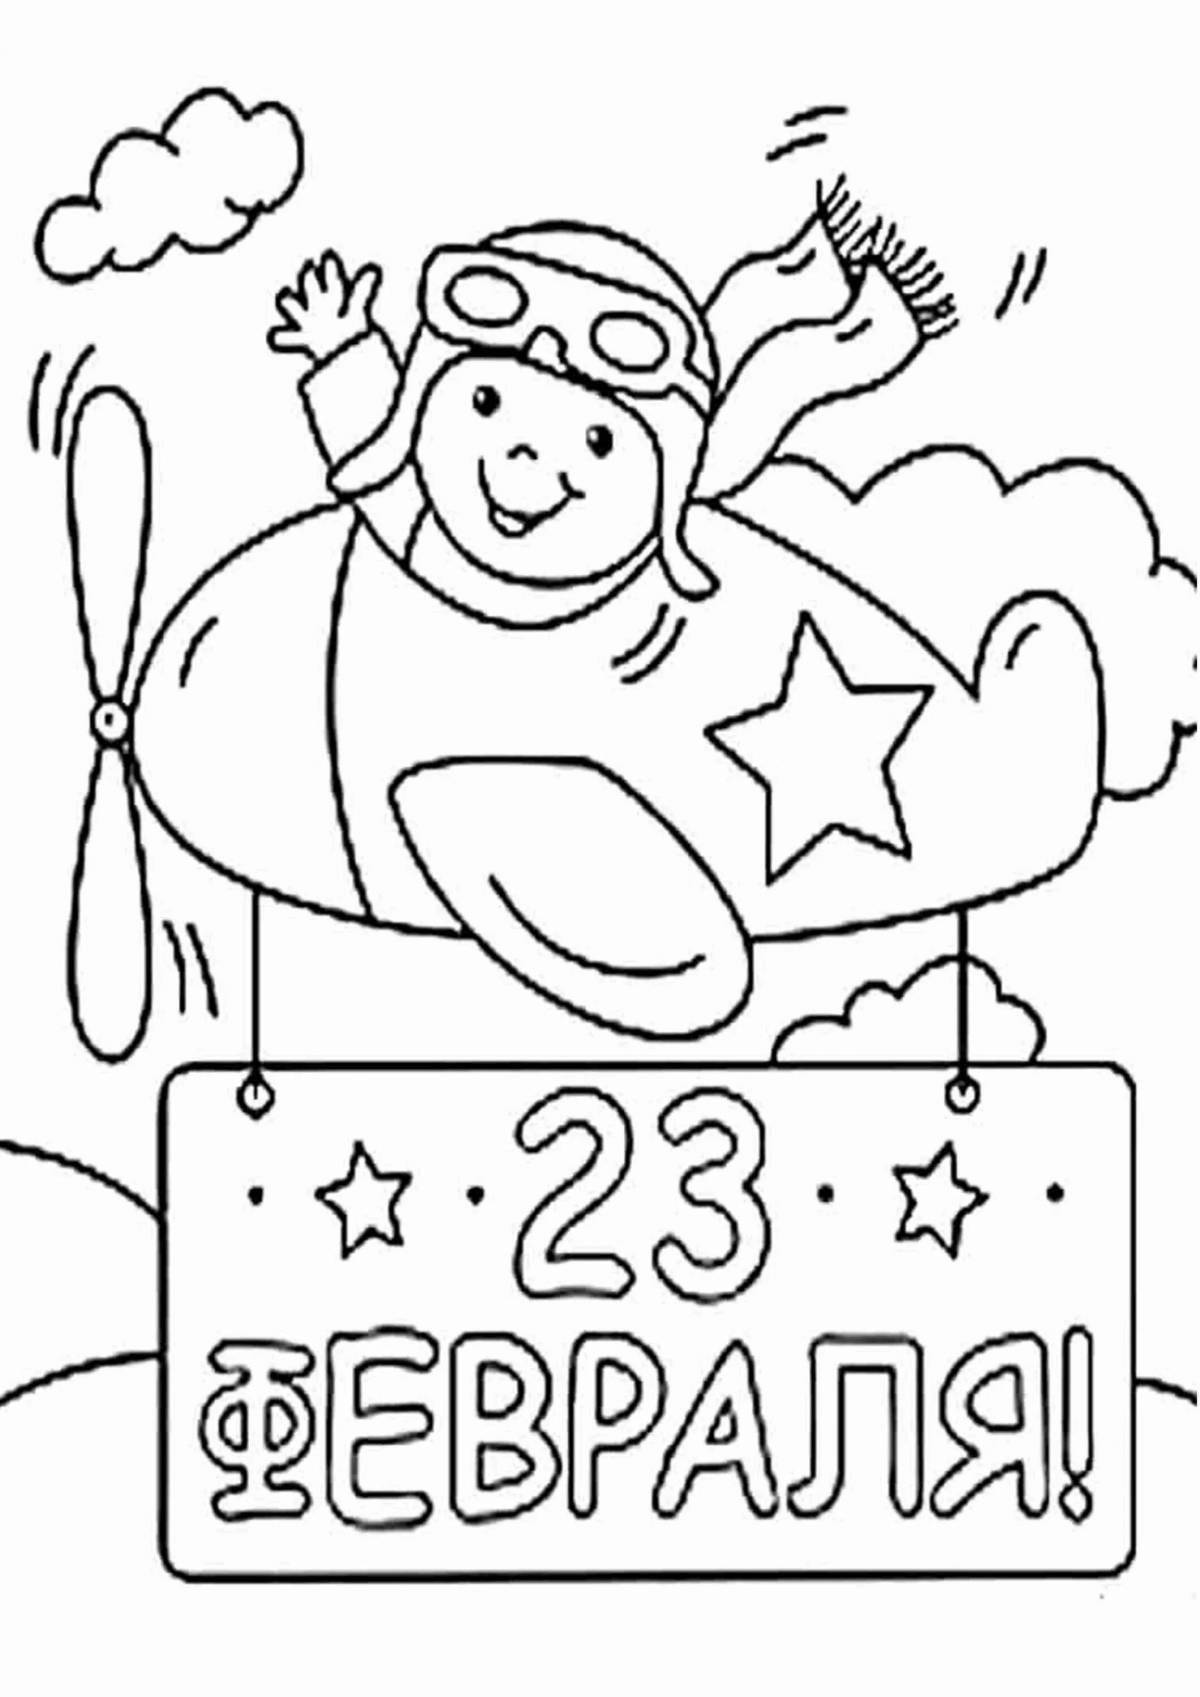 February 23 holiday coloring gift